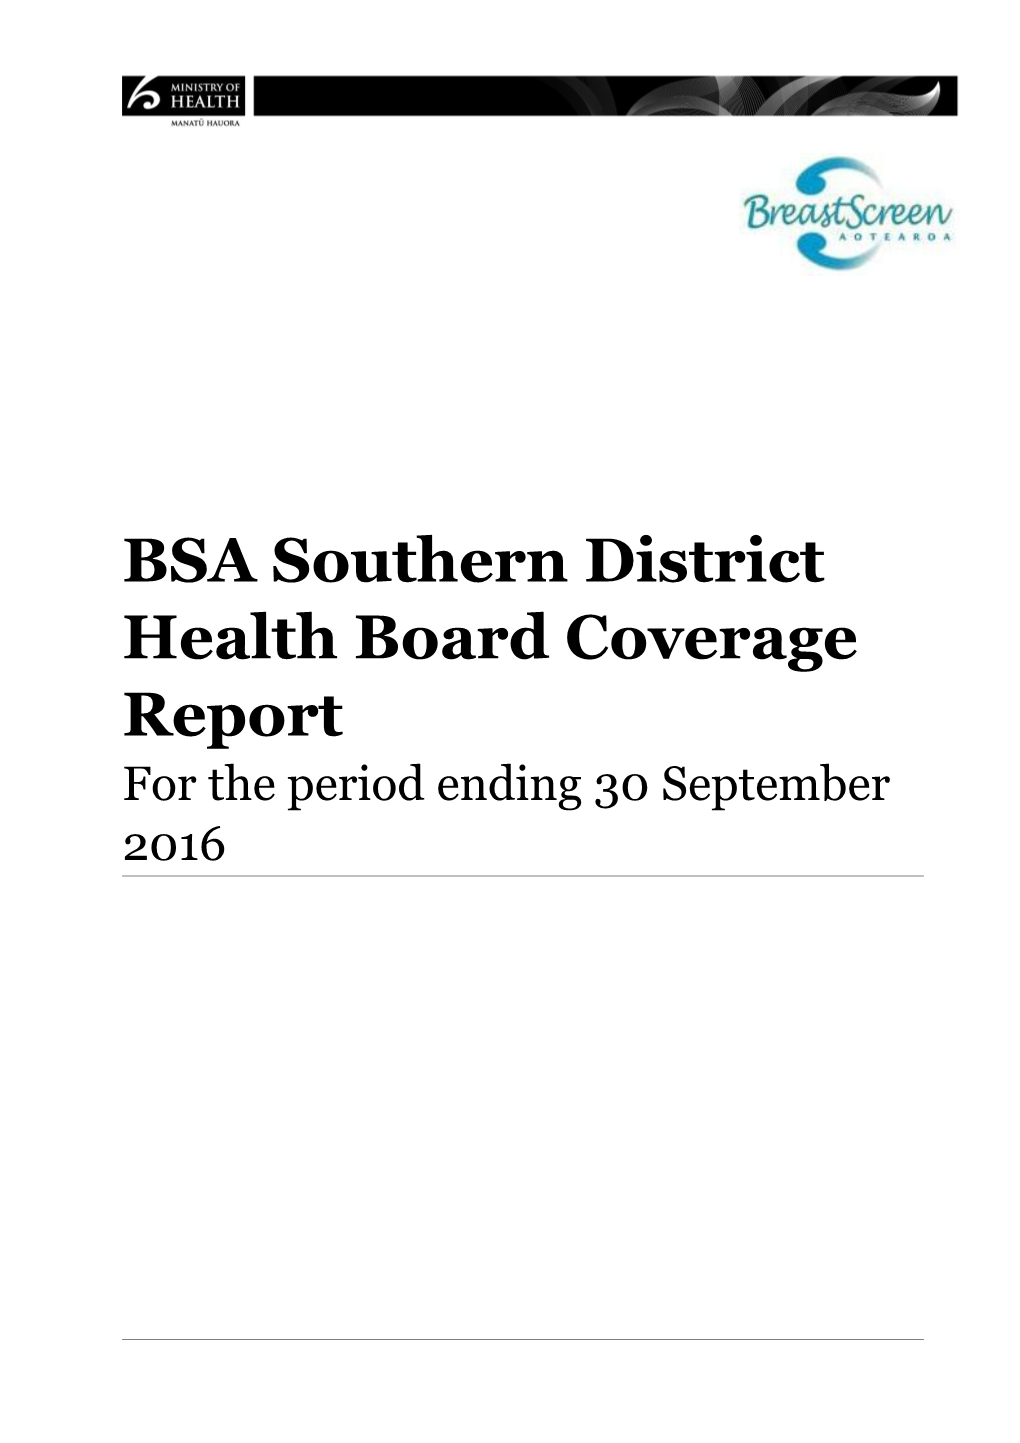 Bsasoutherndistrict Health Boardcoverage Report